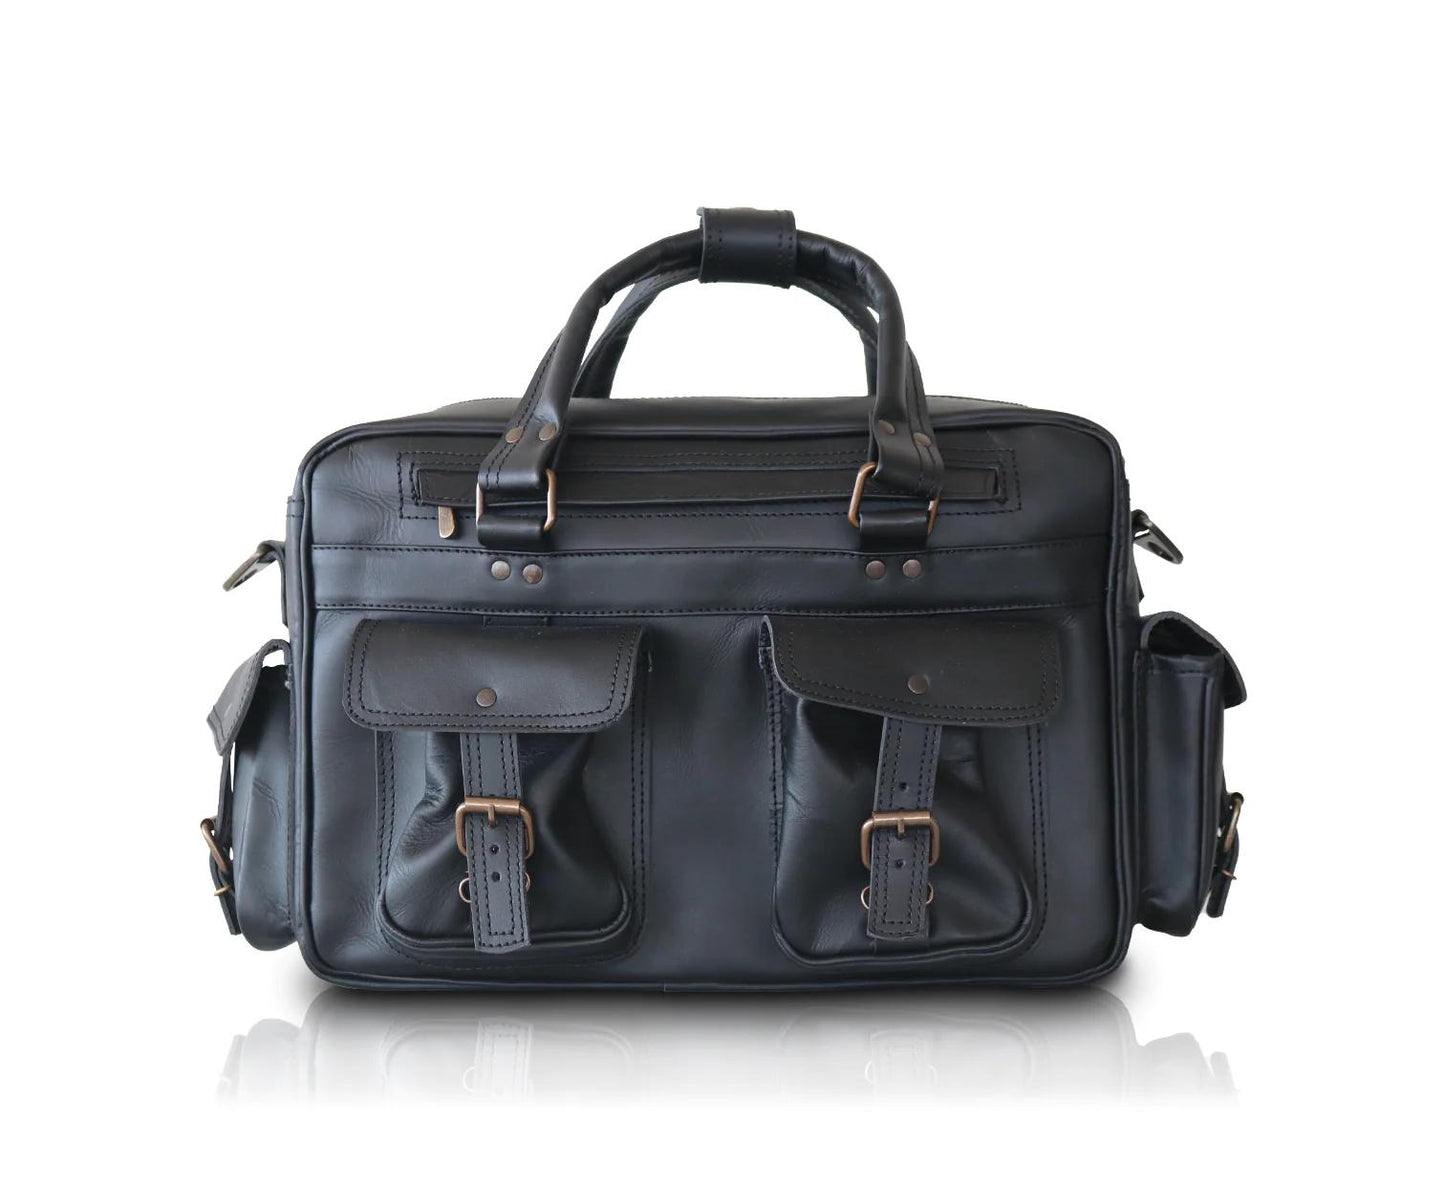 Load image into Gallery viewer, Leather Pilot Briefcase | Light Brown
